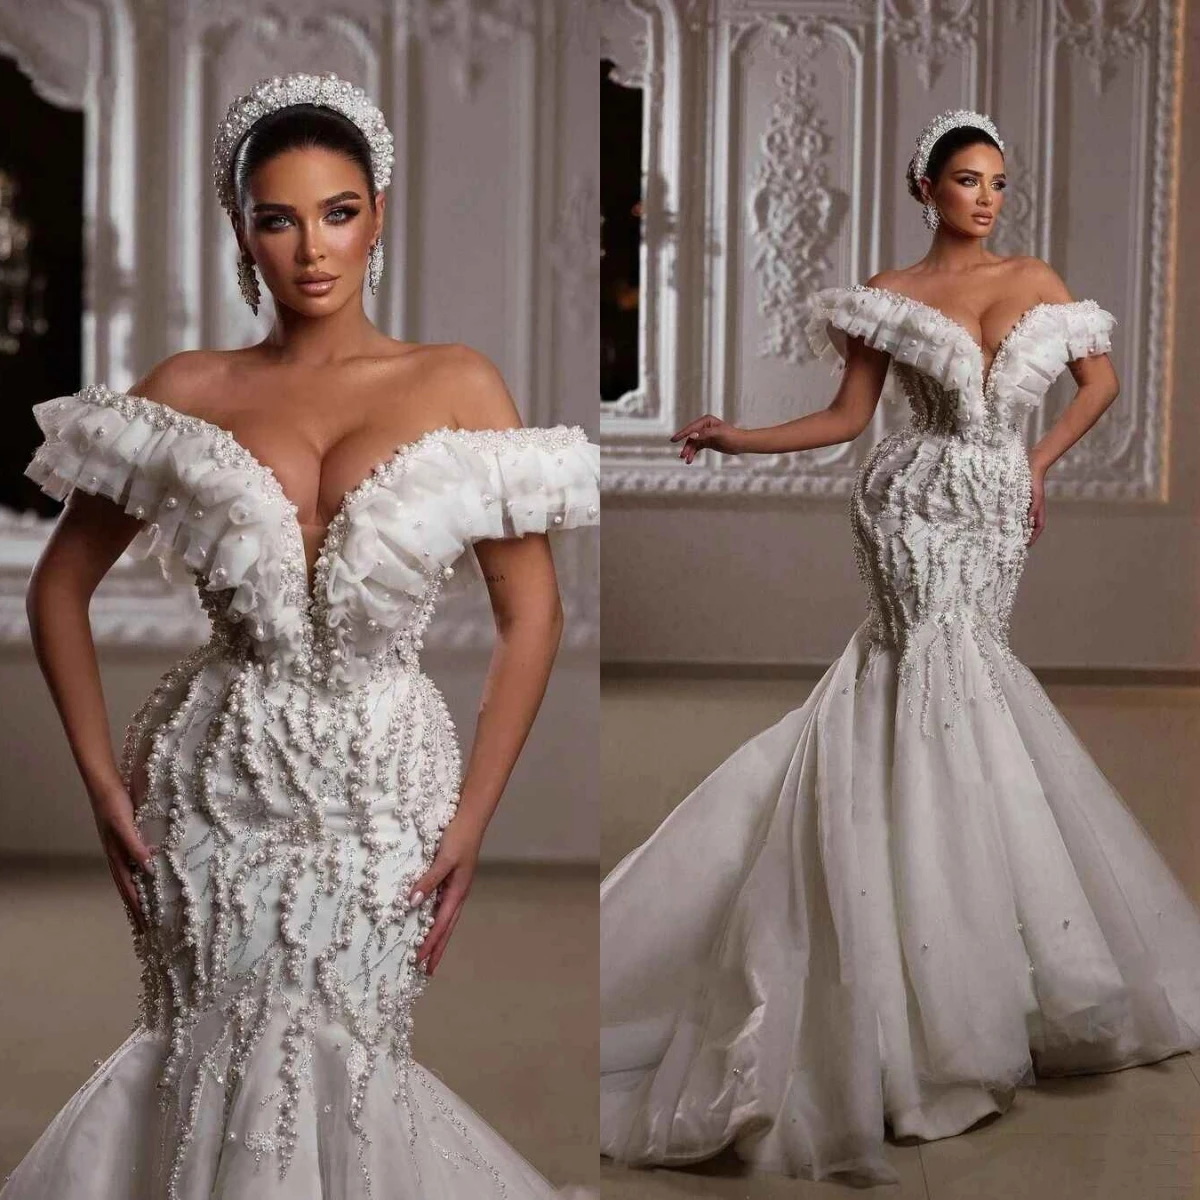 Big Pearls Mermaid Gown Wedding Dresses V-Neck Appliques Beading Lace Sweep Train Bridal Gowns Big Size Custom Size Colour 1